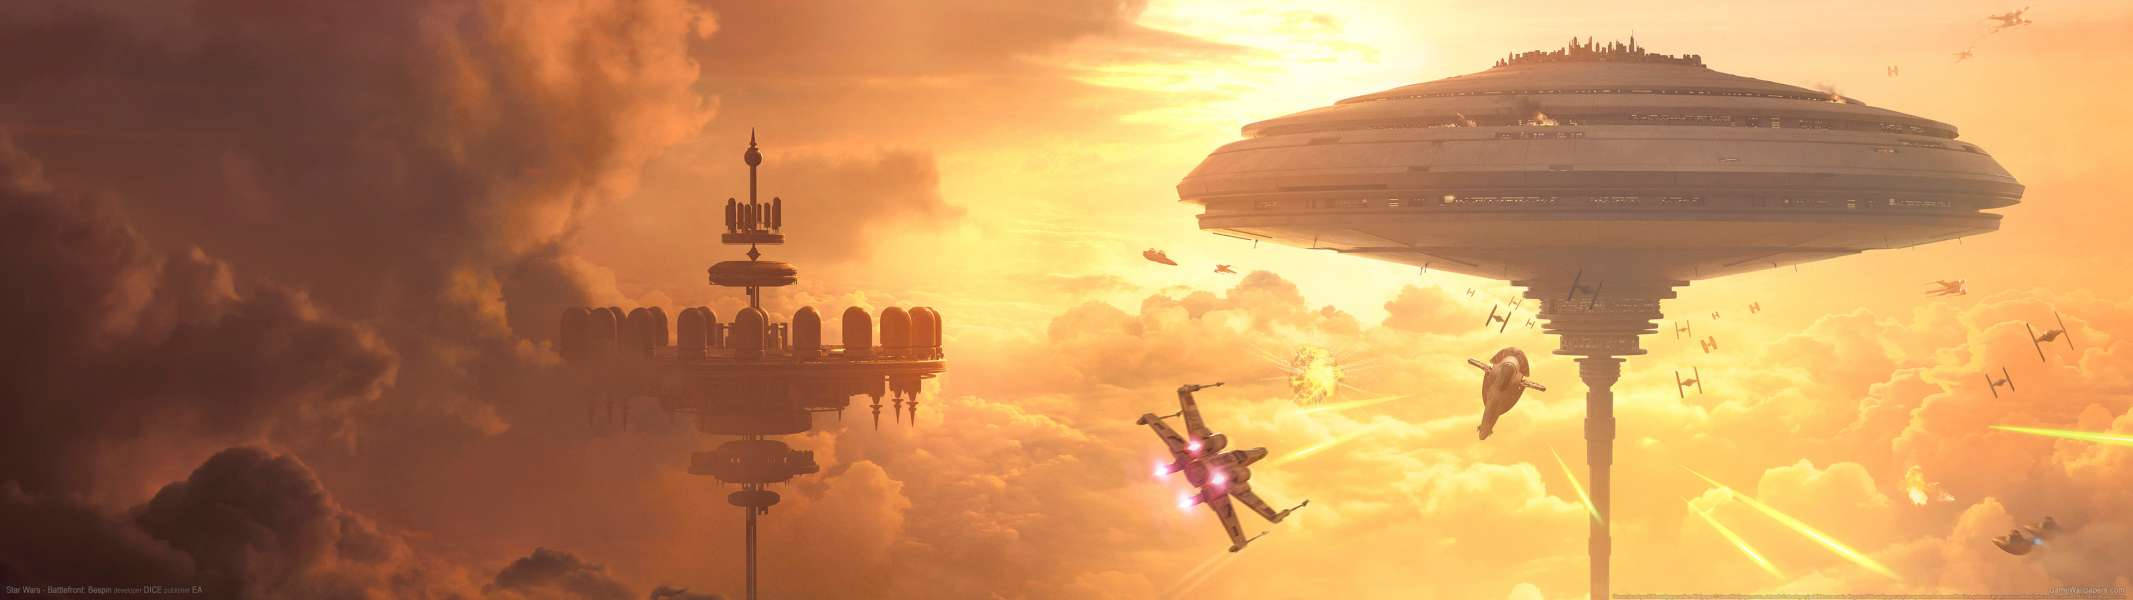 Dual Screen Star Wars Battlefront Bespin Picture